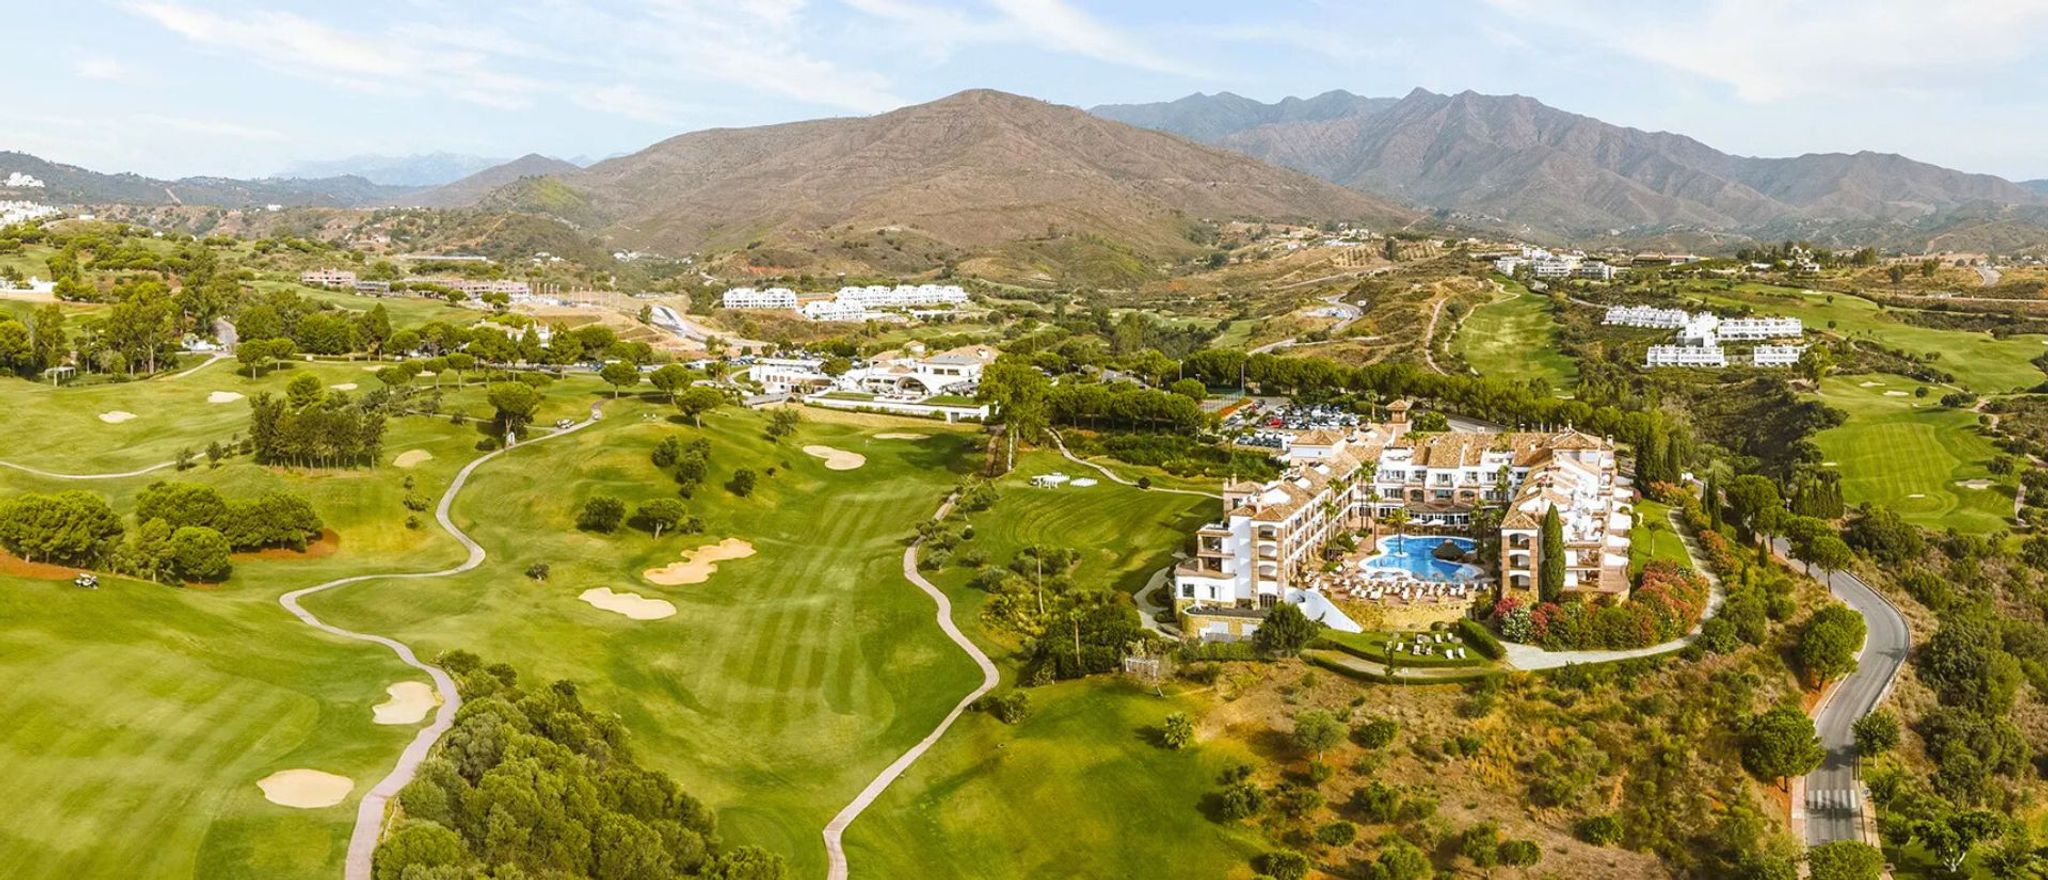 The Best Golf Resorts in the Costa del Sol | Leading Courses